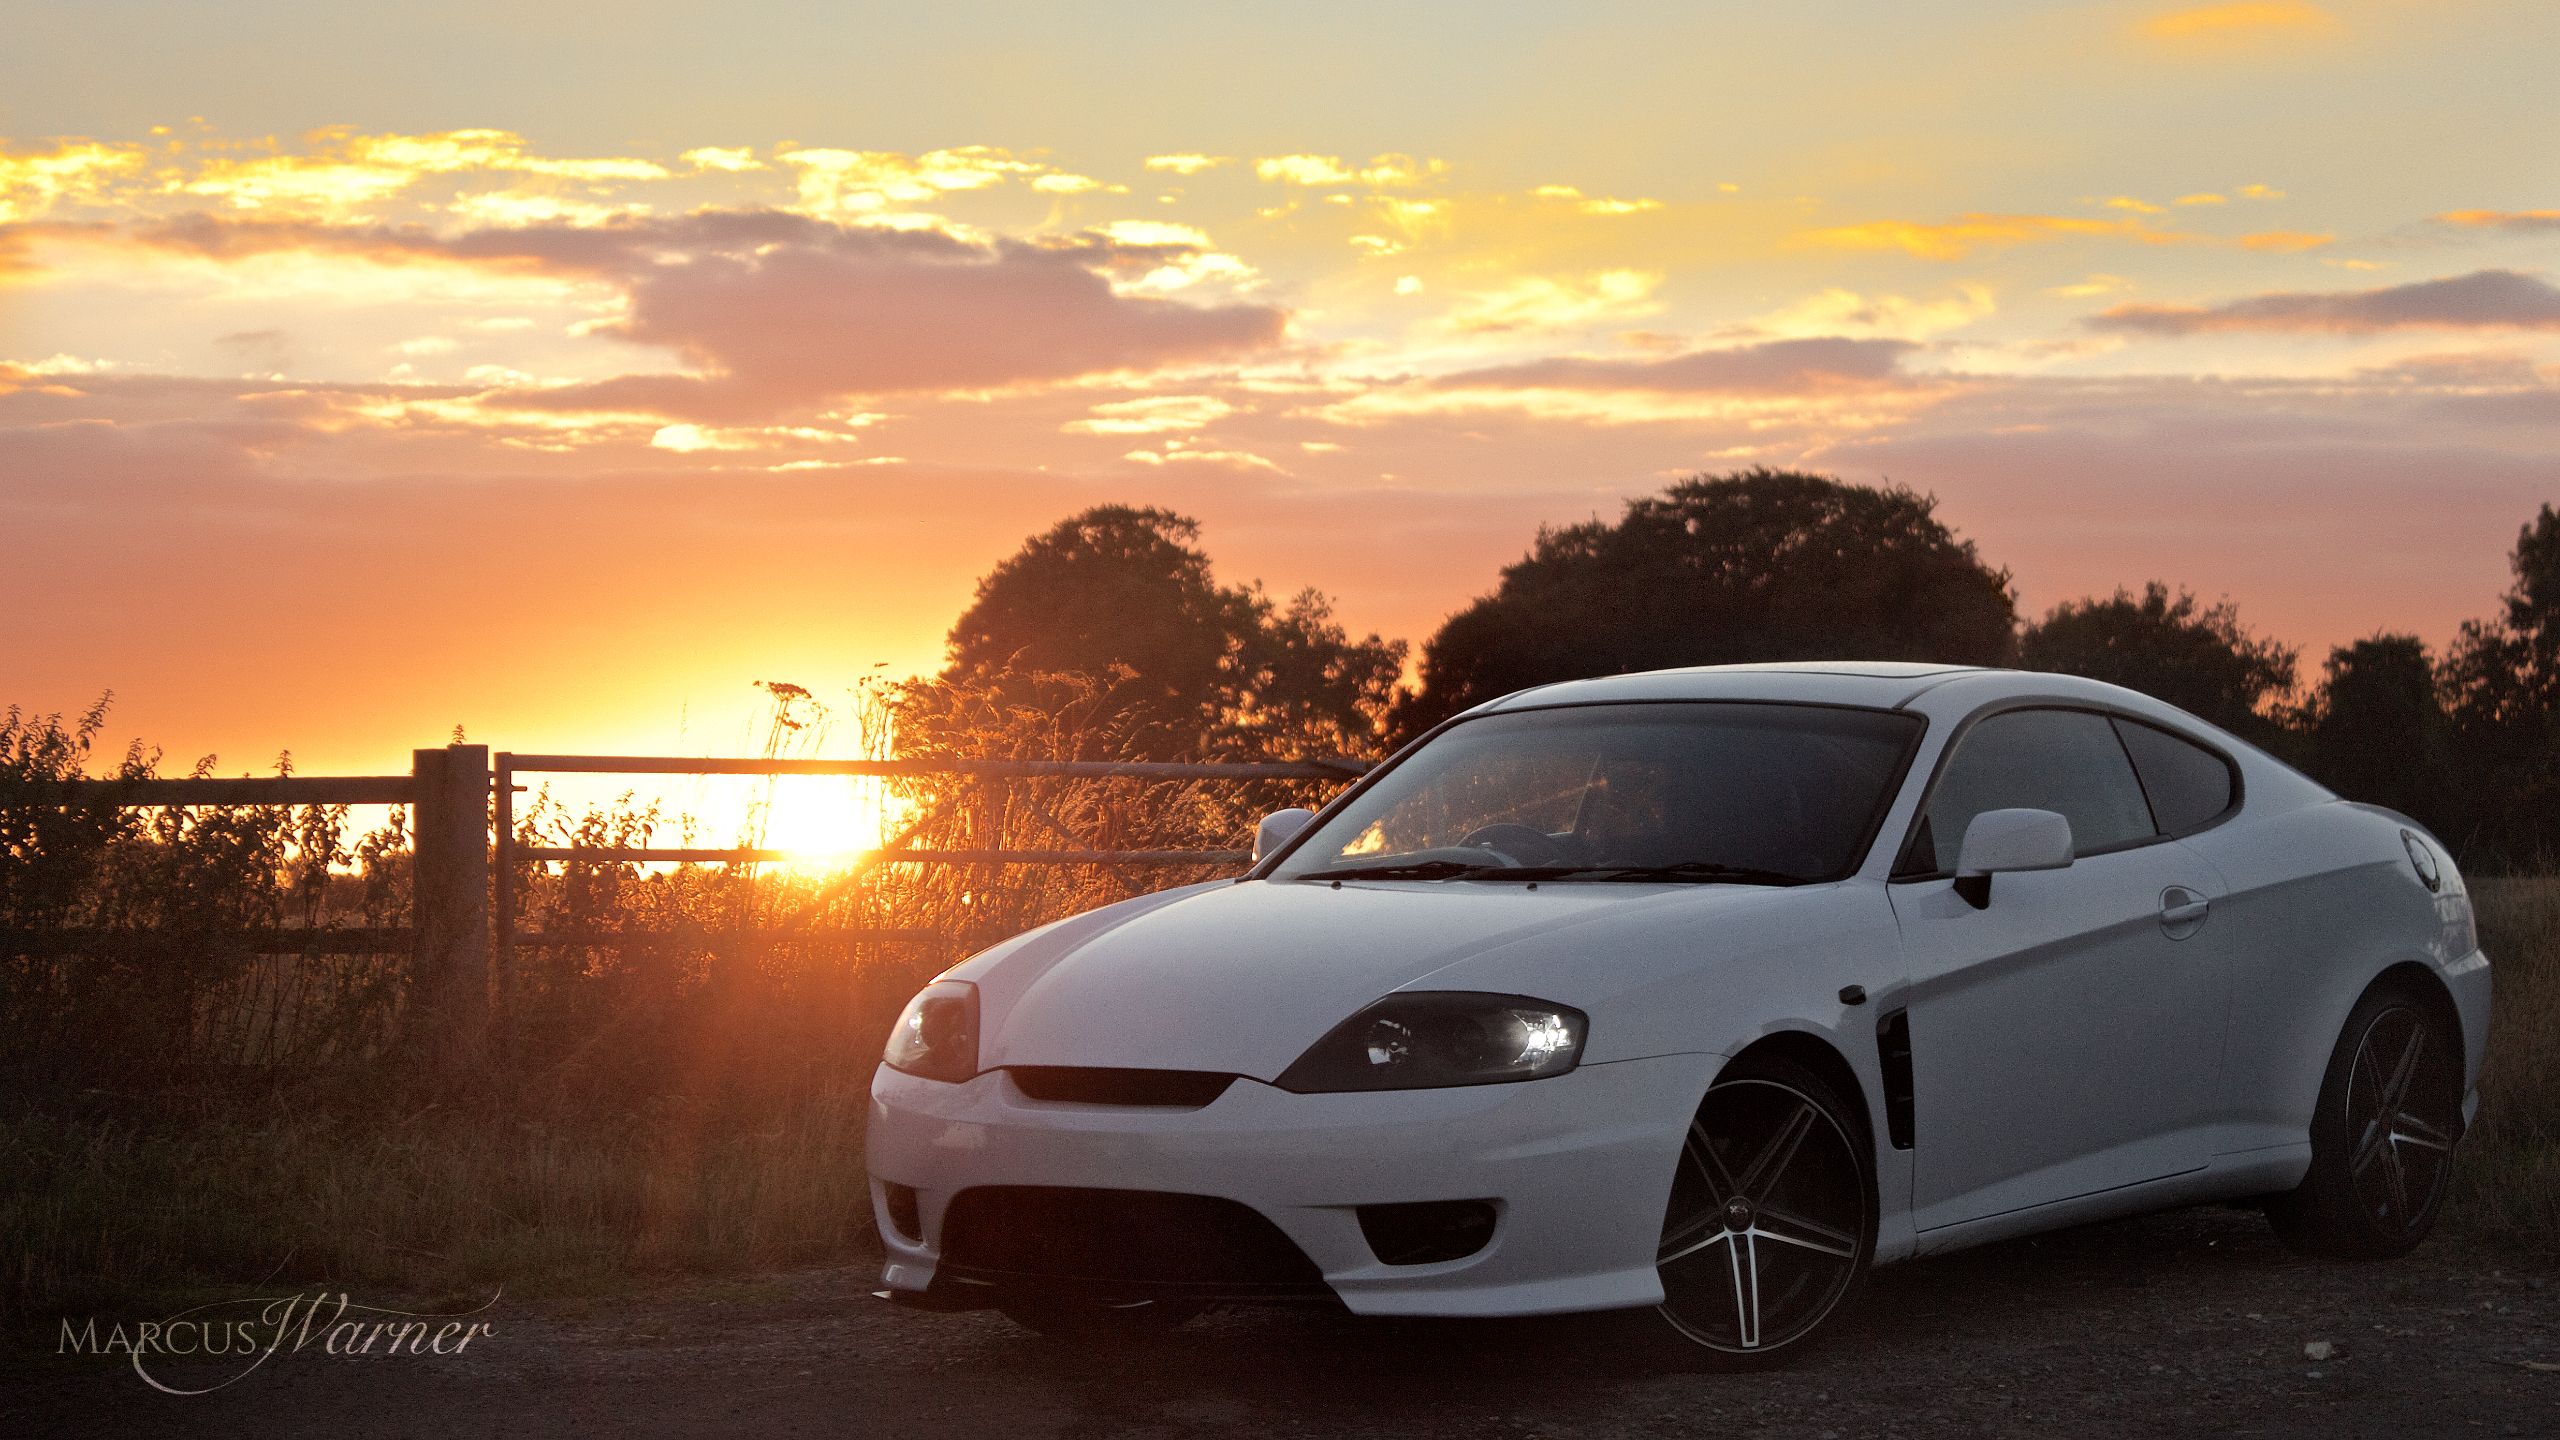 Hyundai Coupe Wallpapers